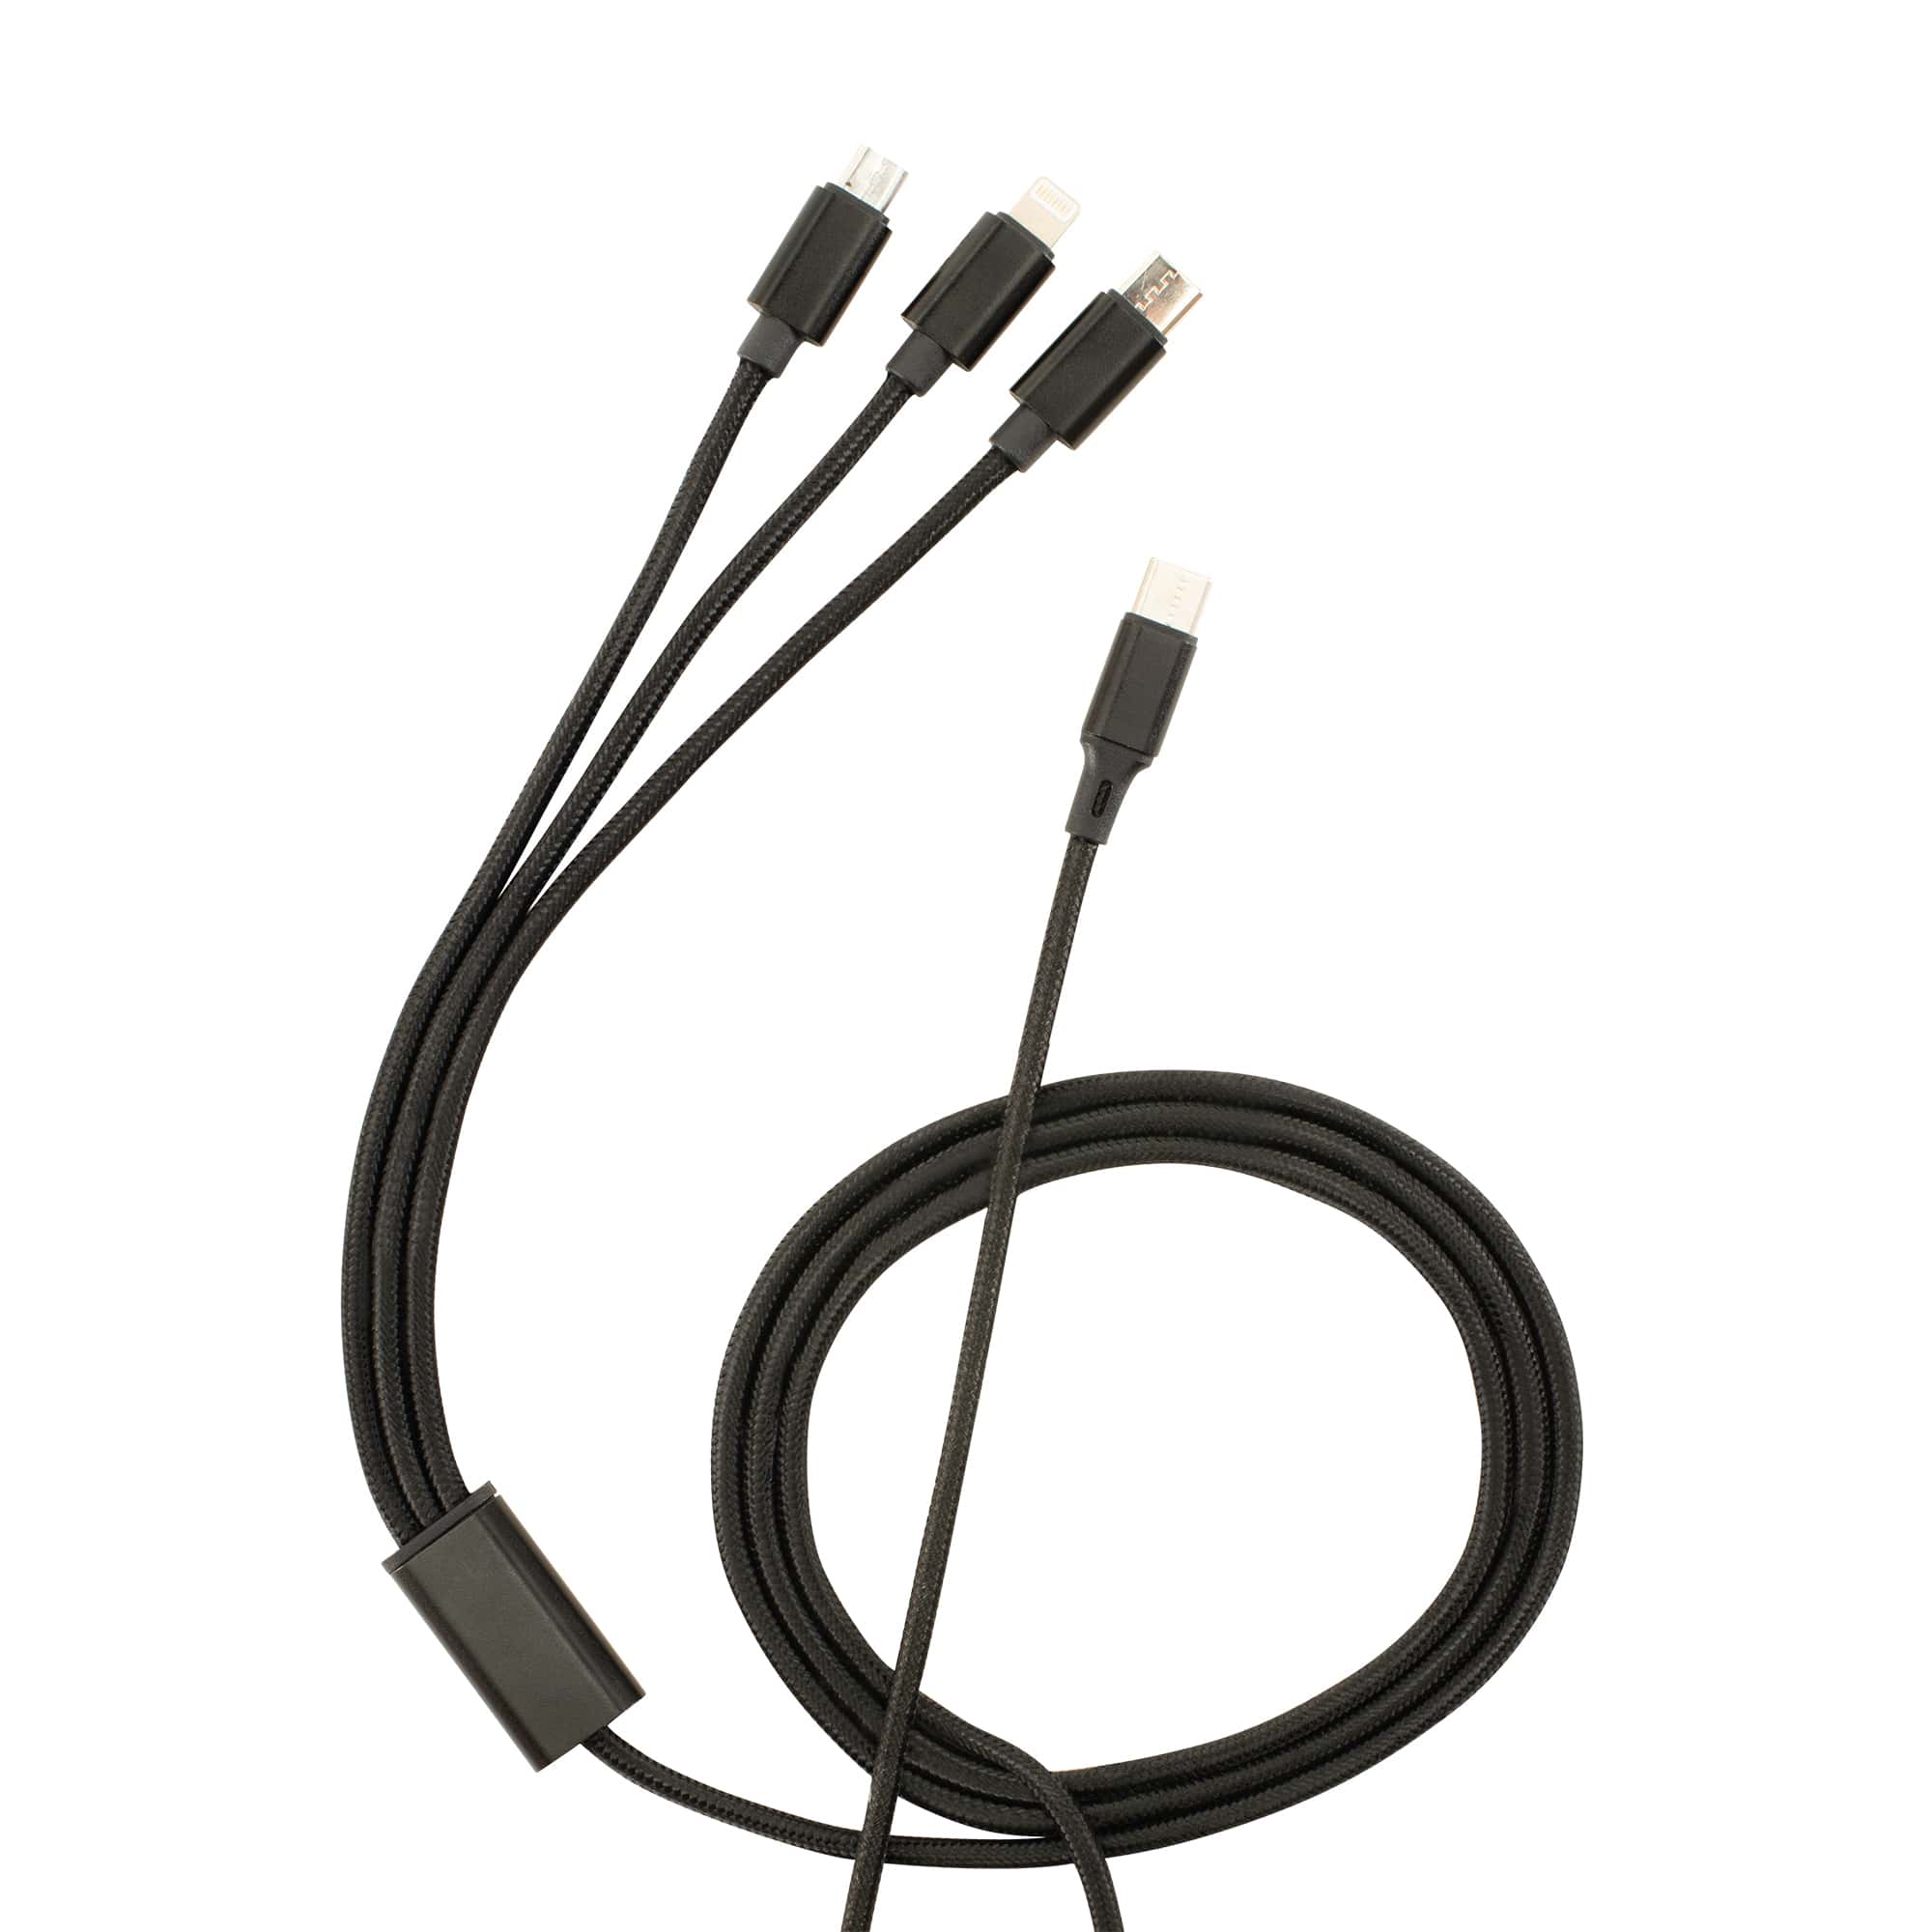 USB-C Charging Cable with Lightning, USB-C, and Micro USB Adapters –  Kitchen Power Pop Ups